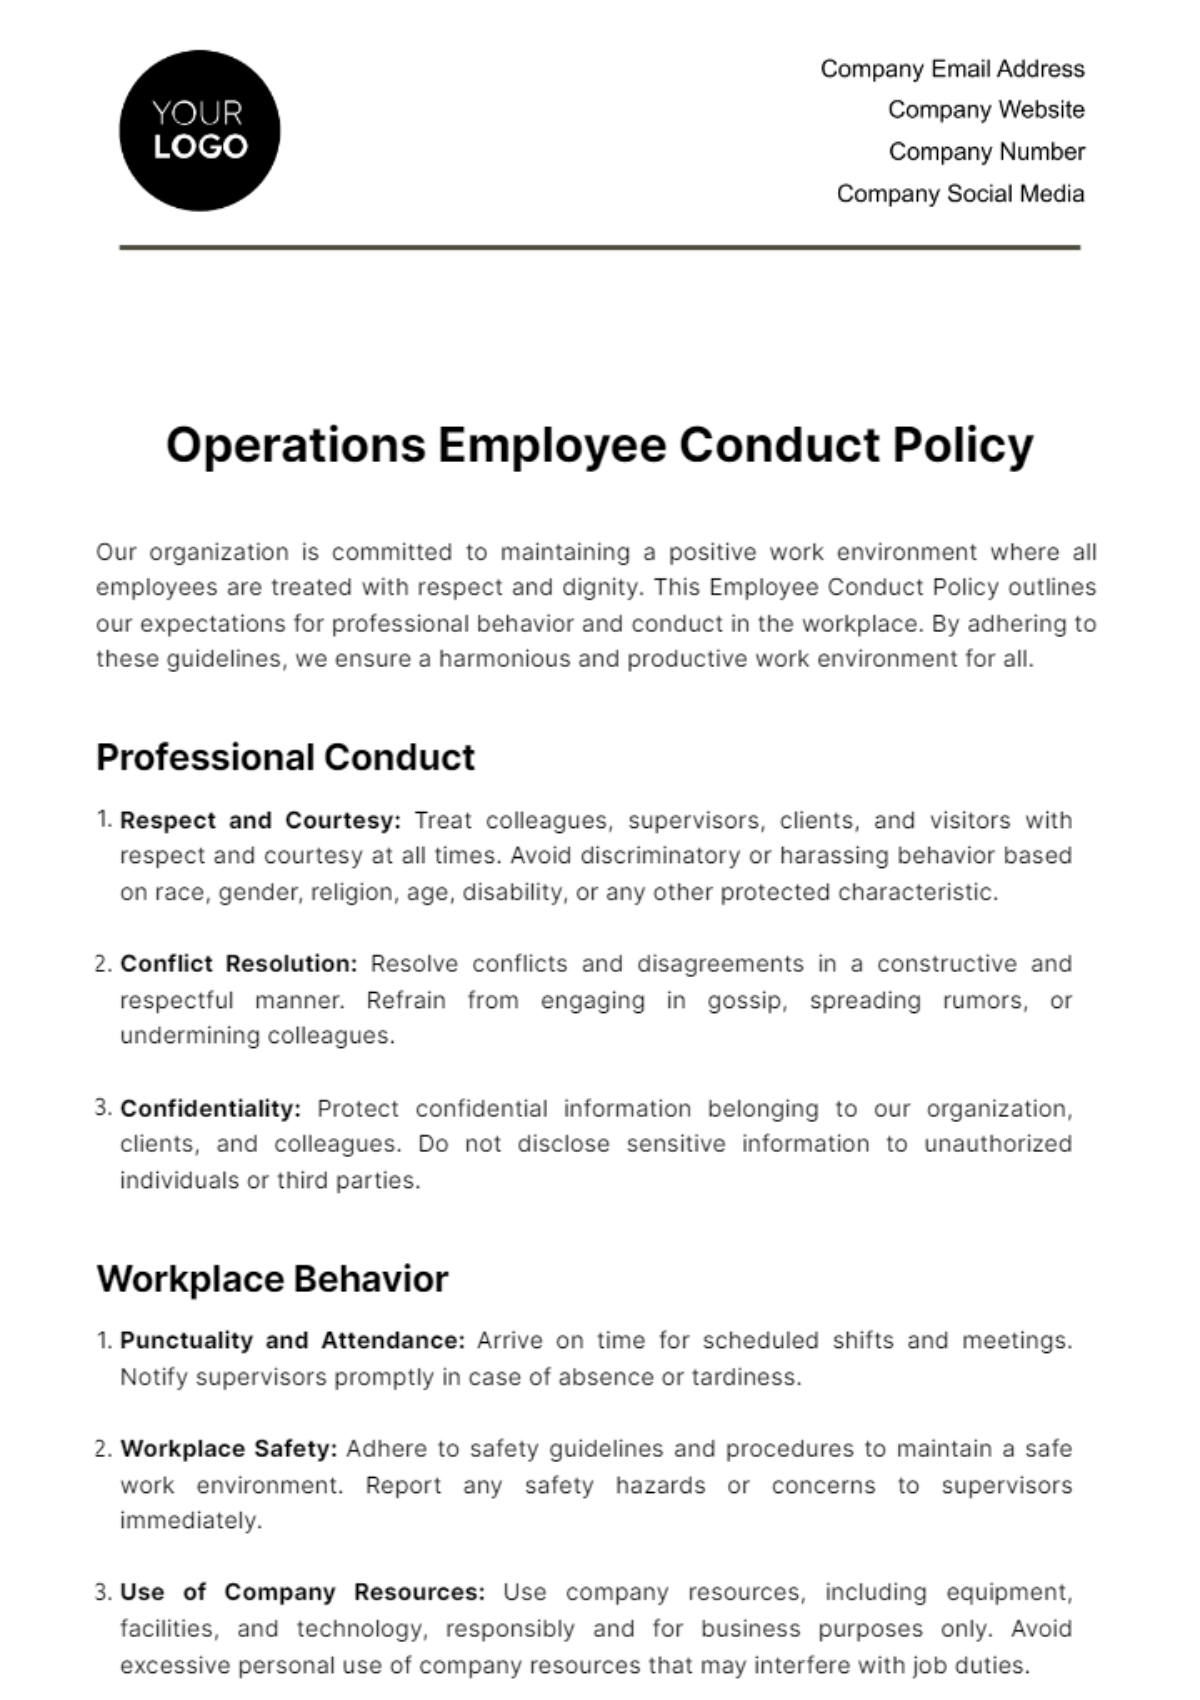 Free Operations Employee Conduct Policy Template